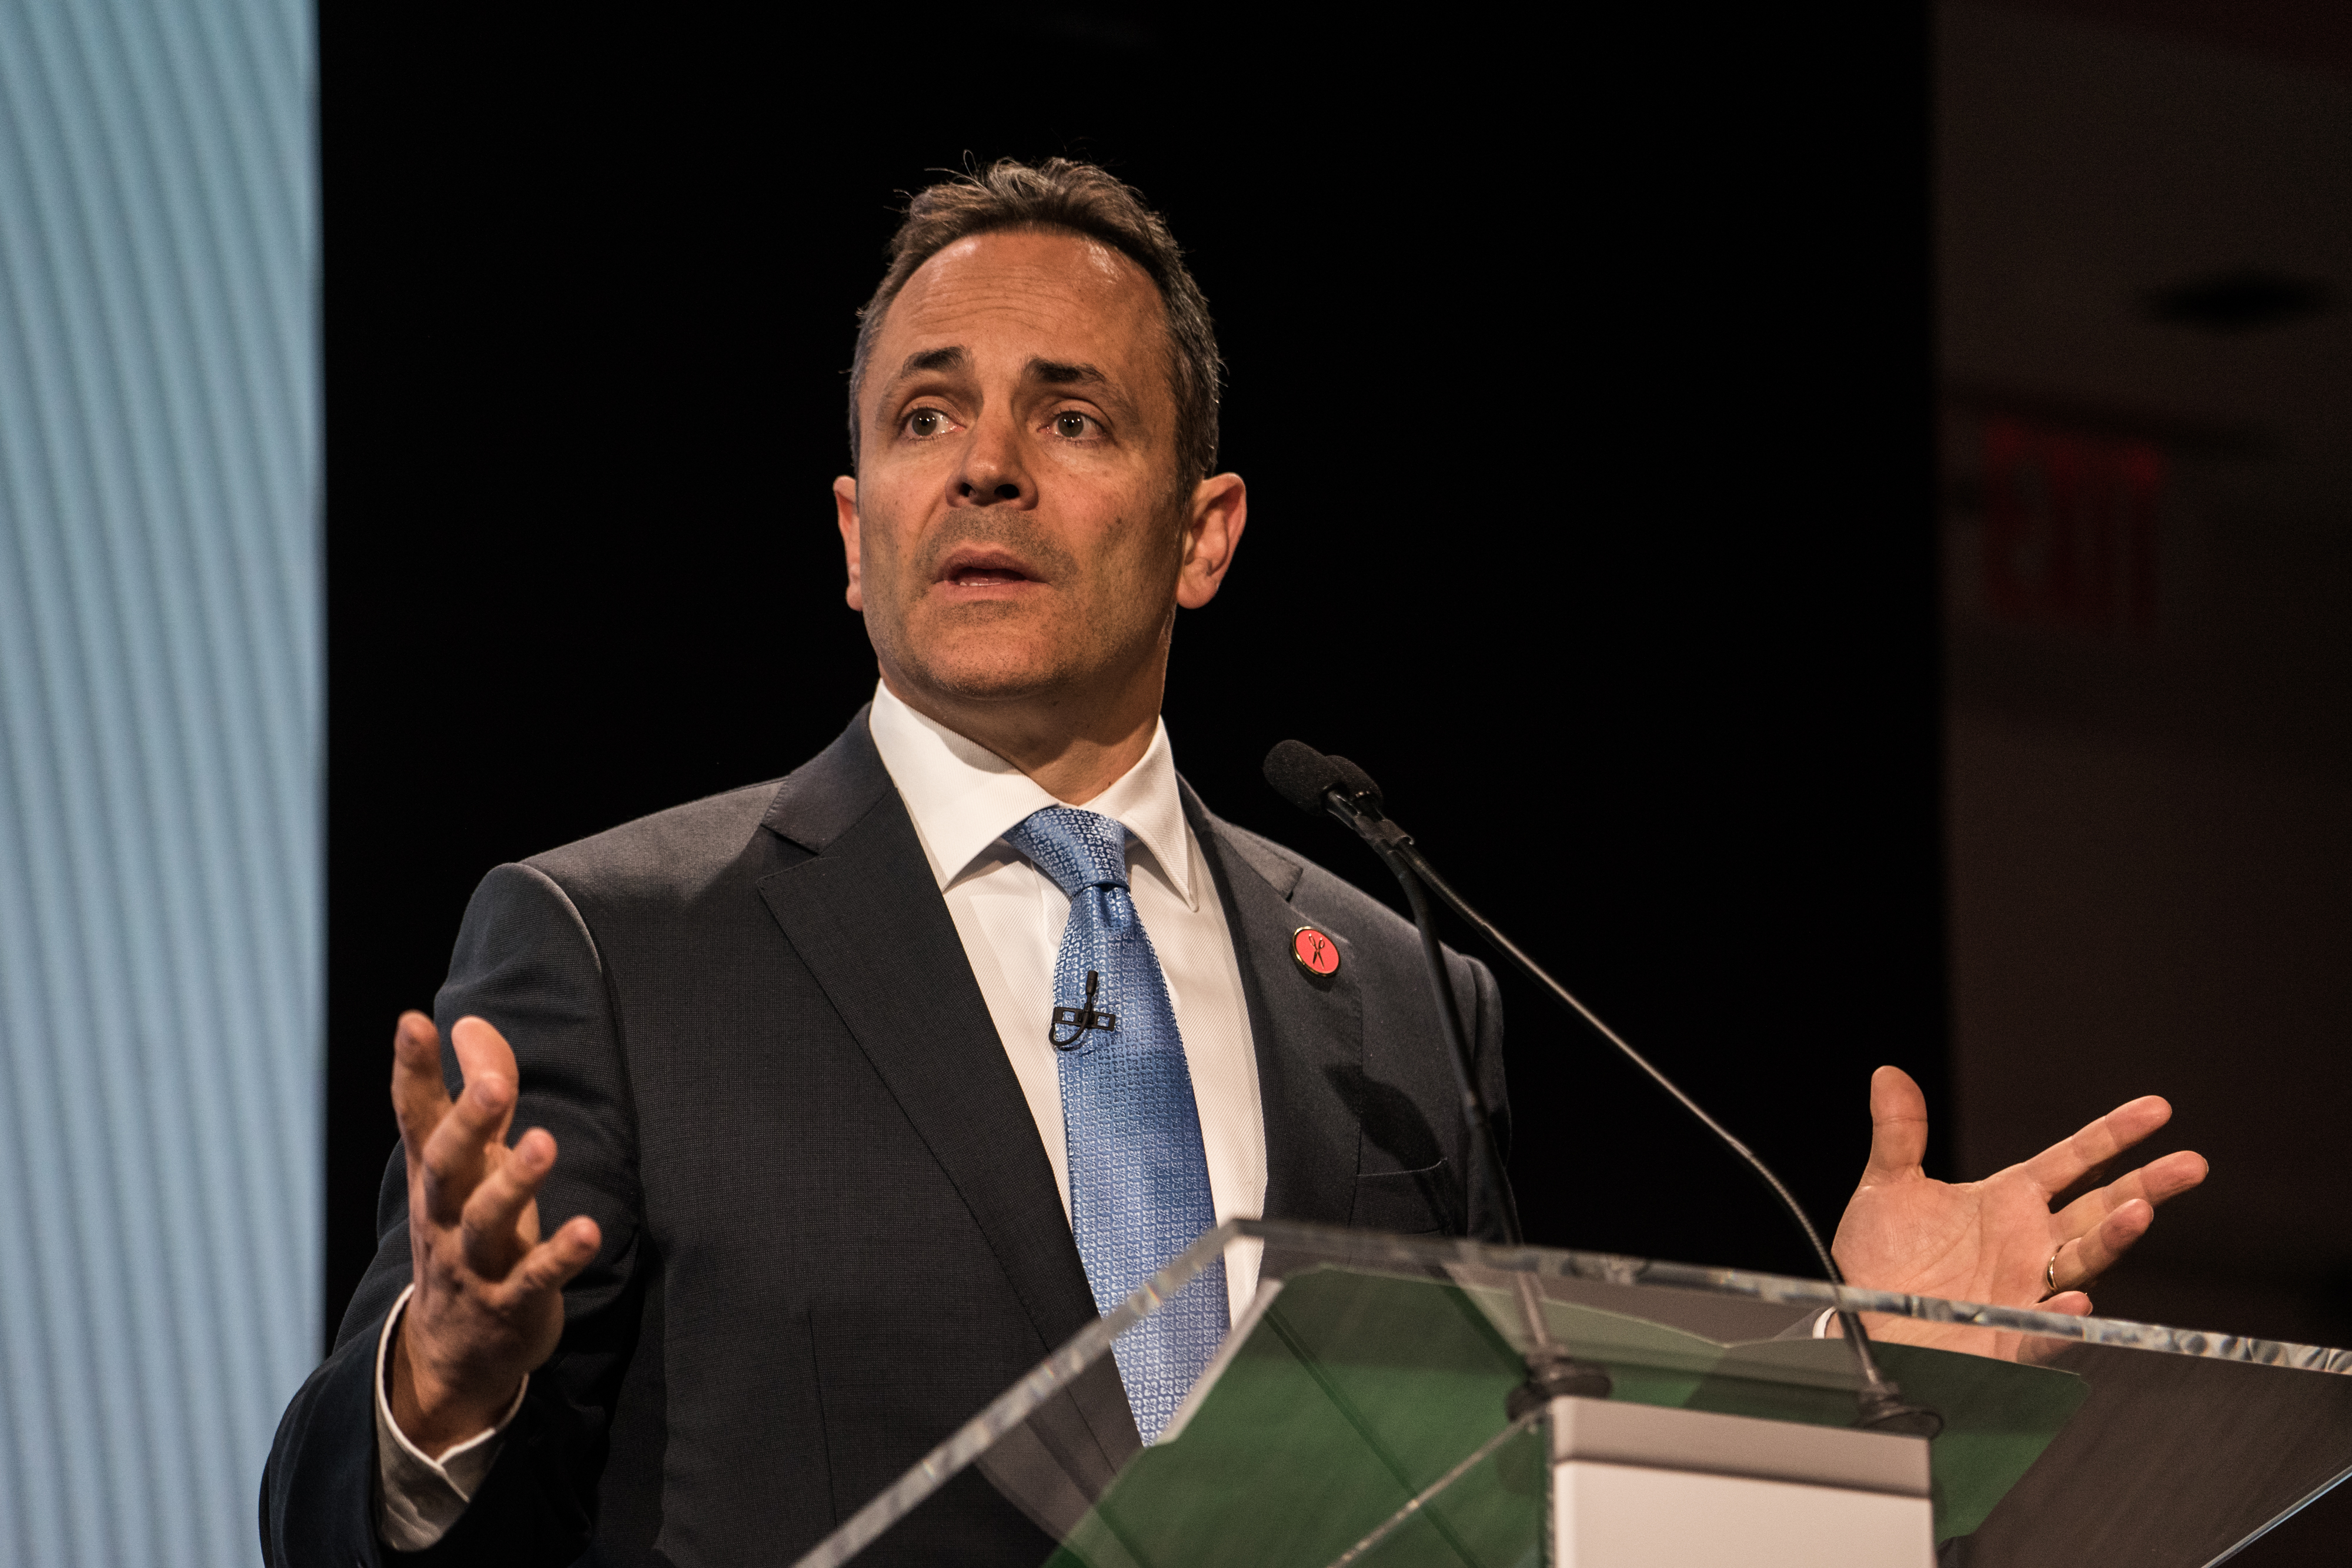 Matt Bevin, governor of Kentucky, speaks during the 2017 International Finance and Infrastructure Cooperation Forum in New York, U.S., on Monday, April 24, 2017. The forum brings together U.S. and Chinese government officials and global business executives from Fortune 500 companies. (Photo by Misha Friedman—Bloomberg/Getty Images)